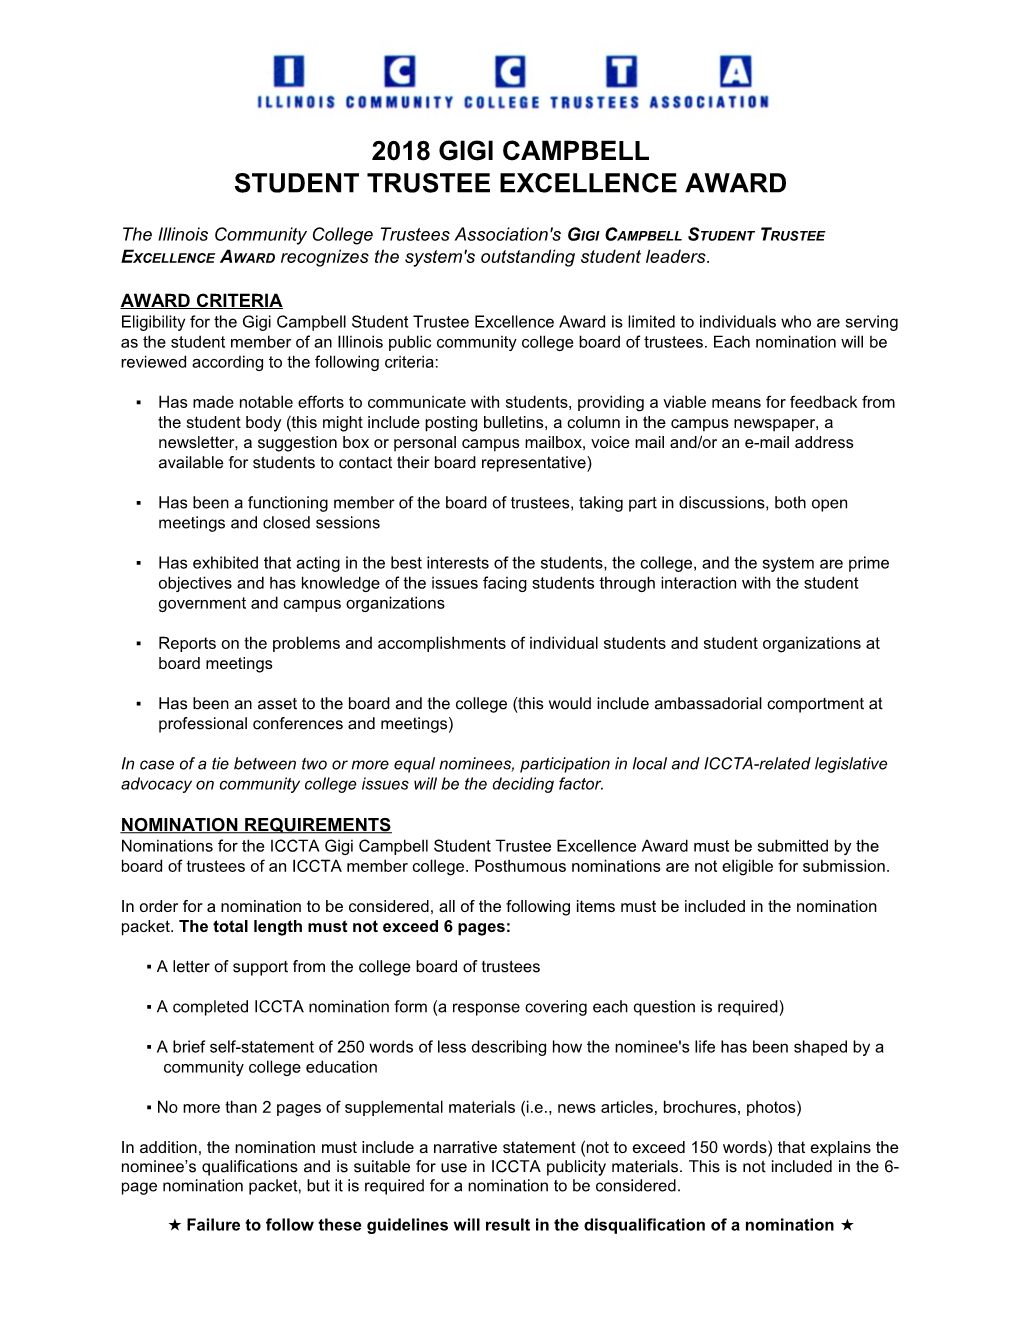 Student Trustee Excellence Award